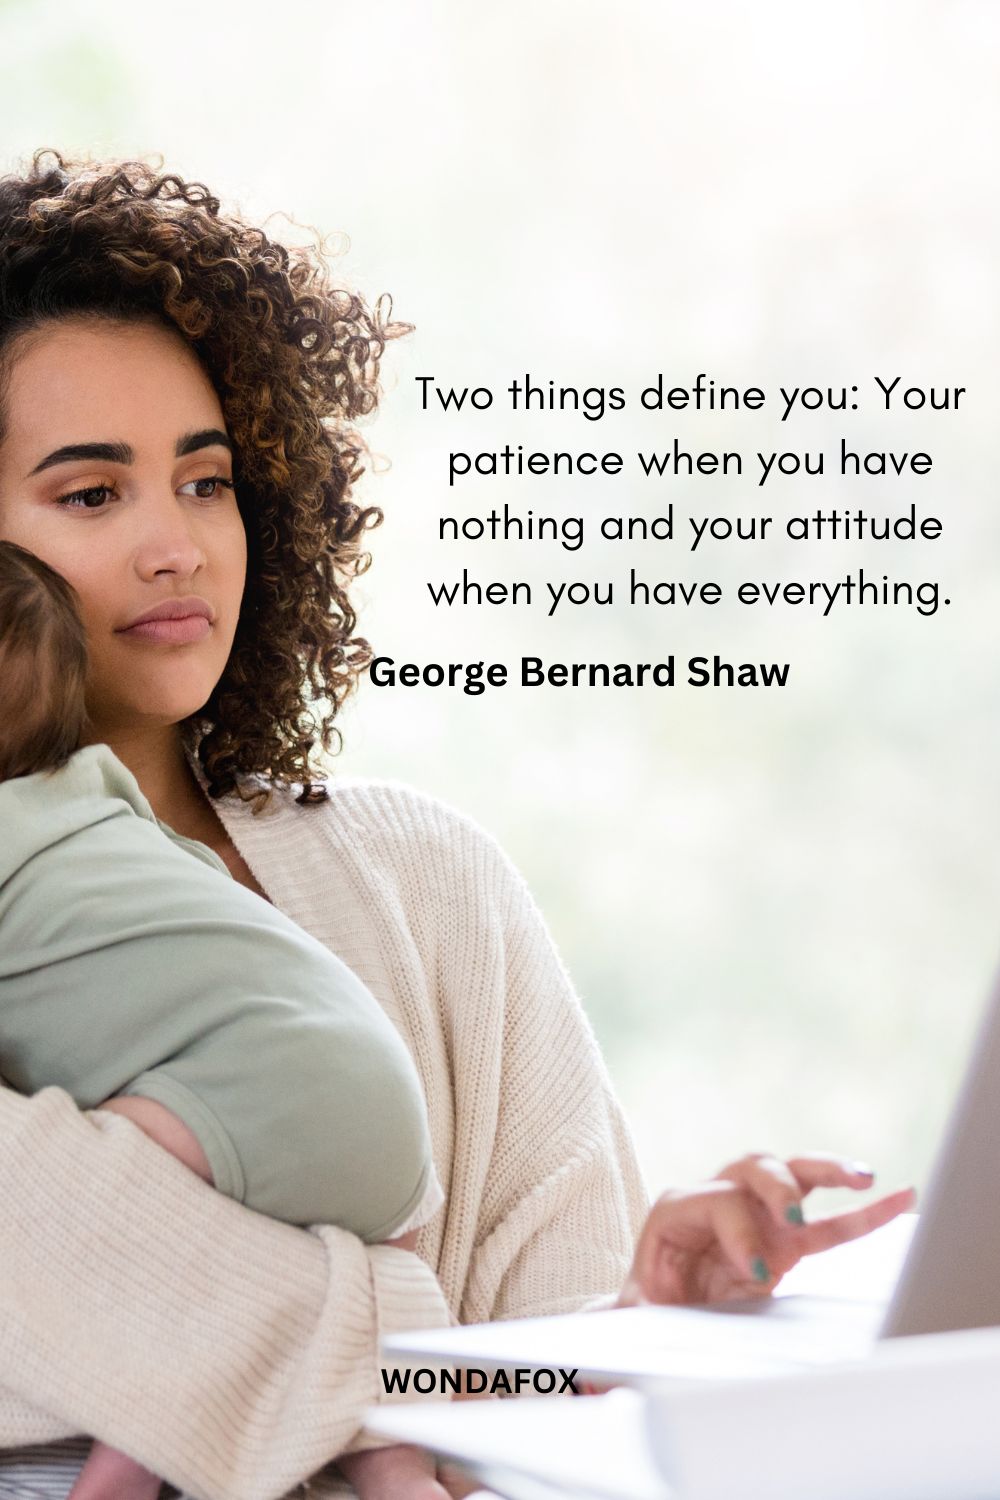 Two things define you: Your patience when you have nothing and your attitude when you have everything.
George Bernard Shaw